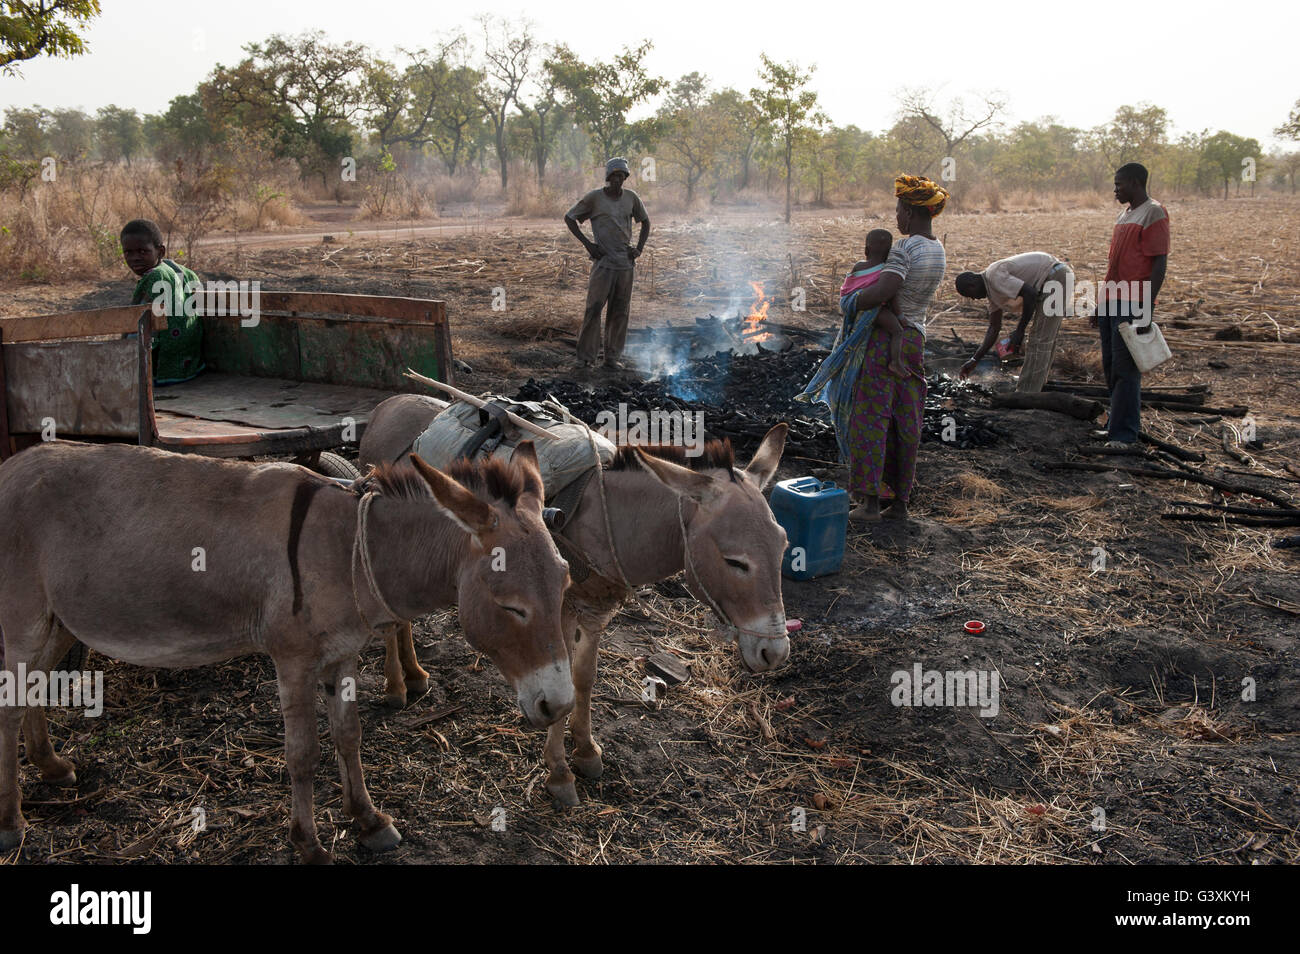 MALI, Sahel region, over production of charcoal from bush wood is a environmental impact for this dry region, charcoal is used for cooking energy Stock Photo